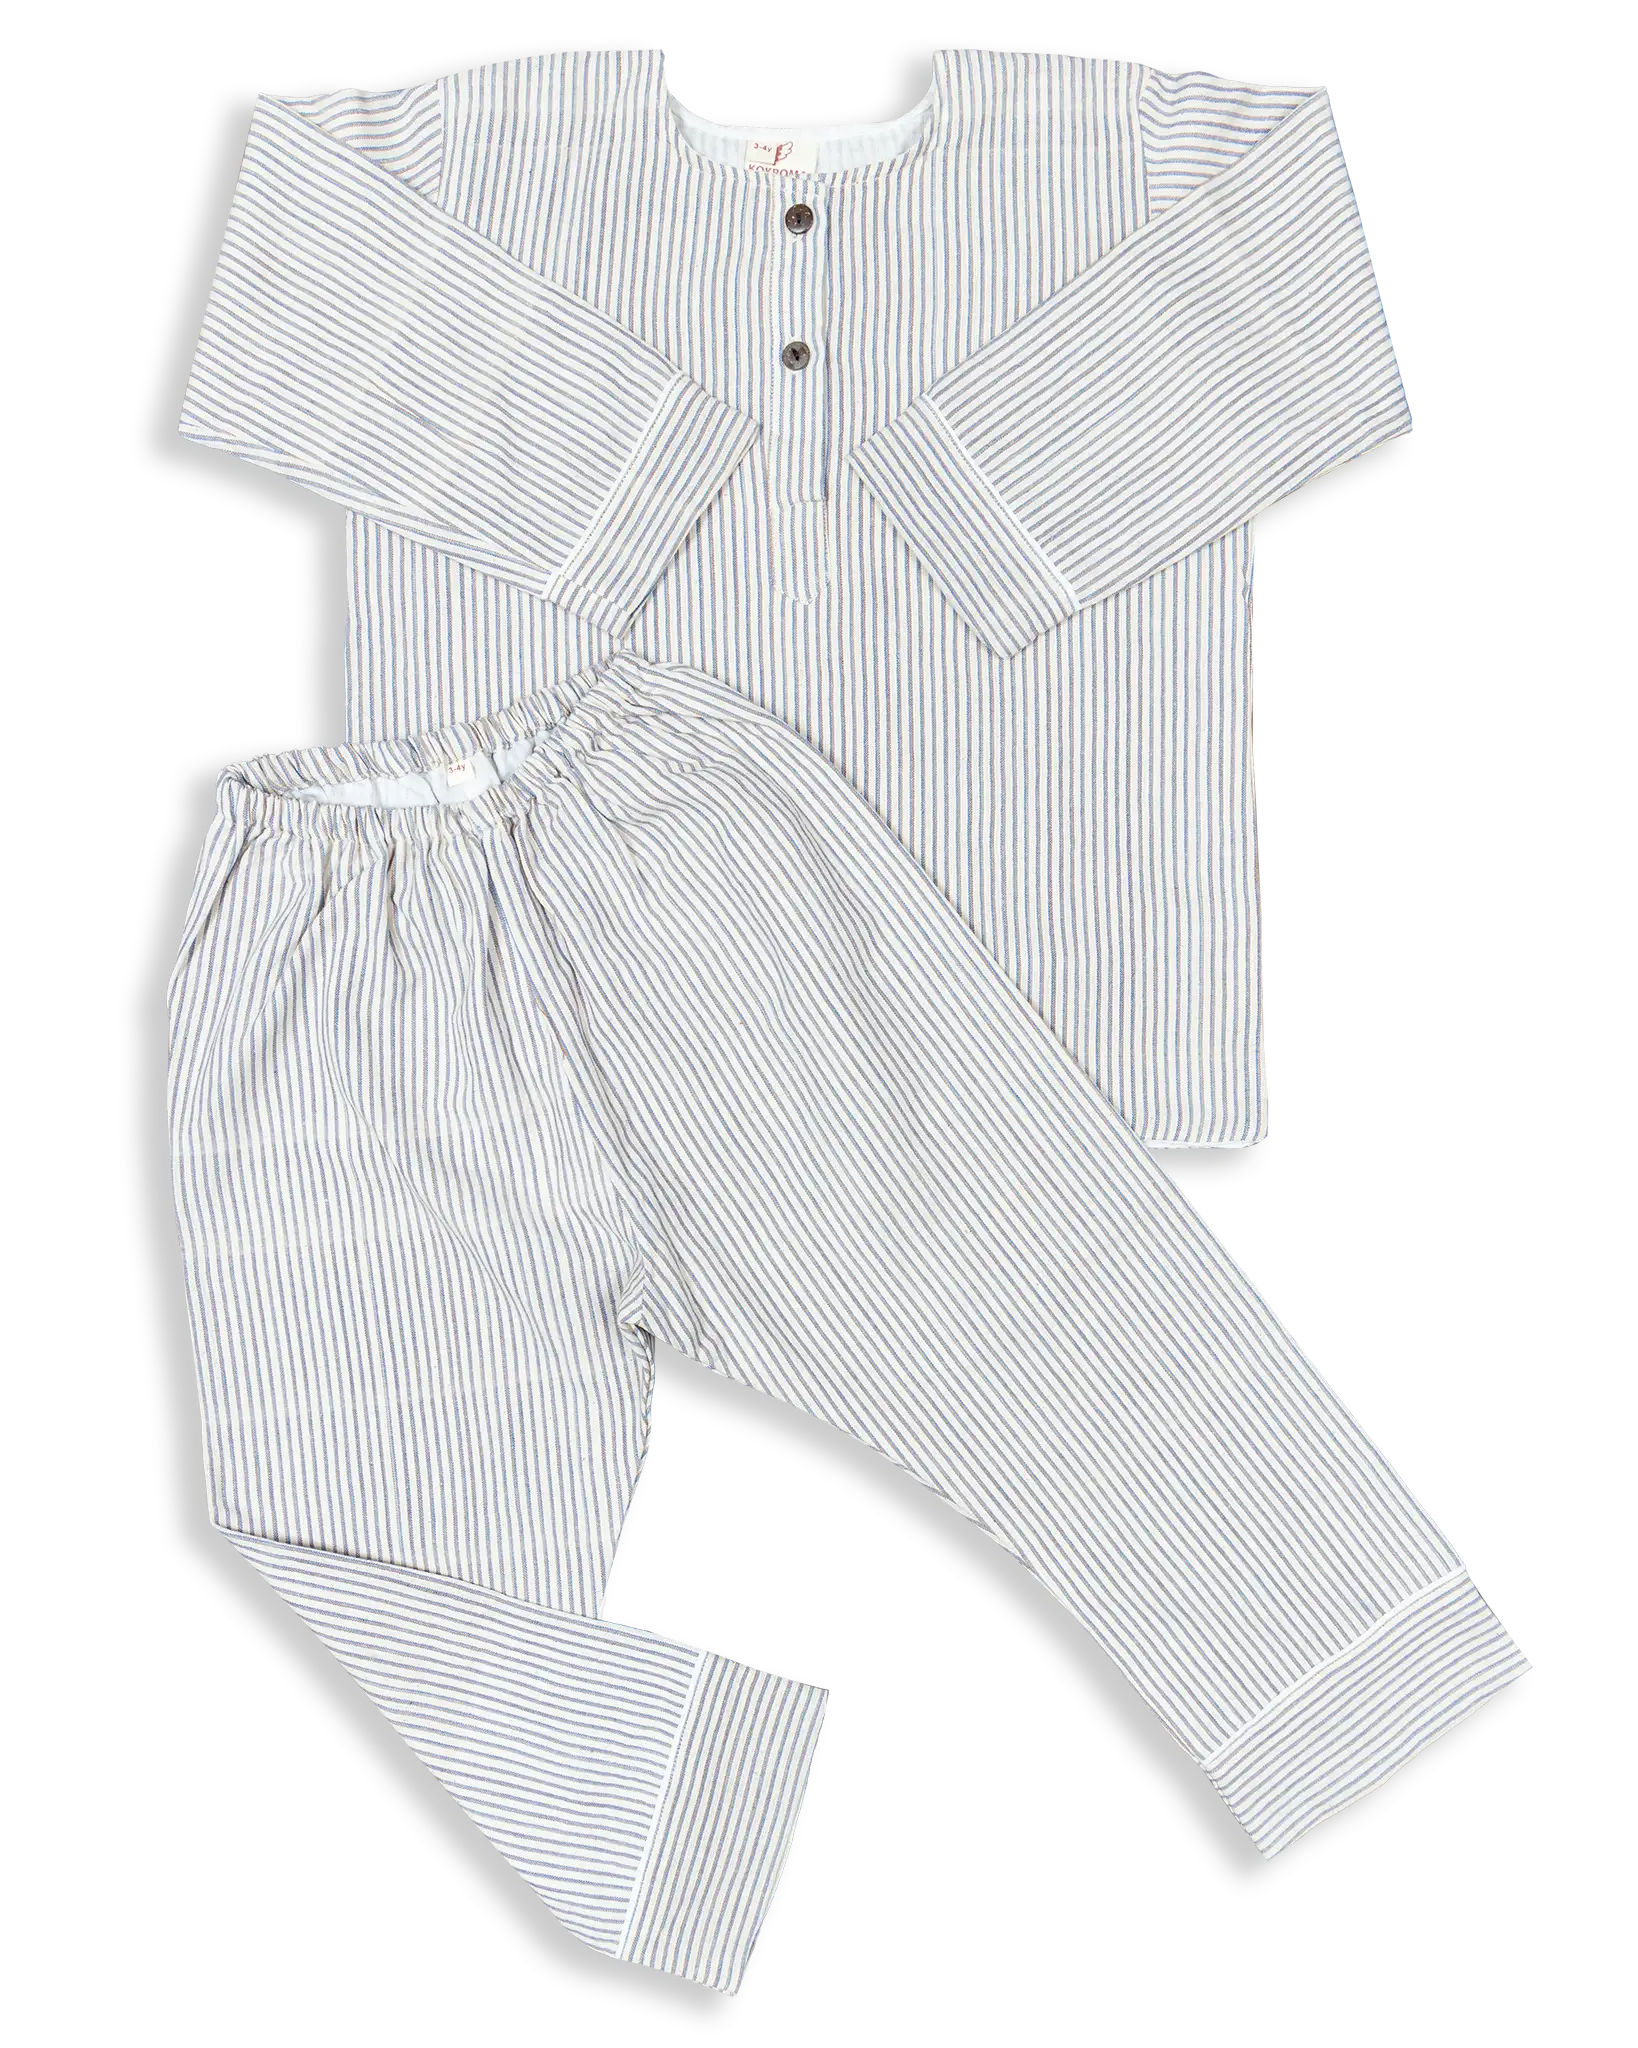 These classic cotton striped Pyjamas are some of our best selling products. Designed and woven here in Nepal they are made with the finest voile lining. It is also known as cotton cashmere, well known and used for kids wear due to the softness and its breathable nature.